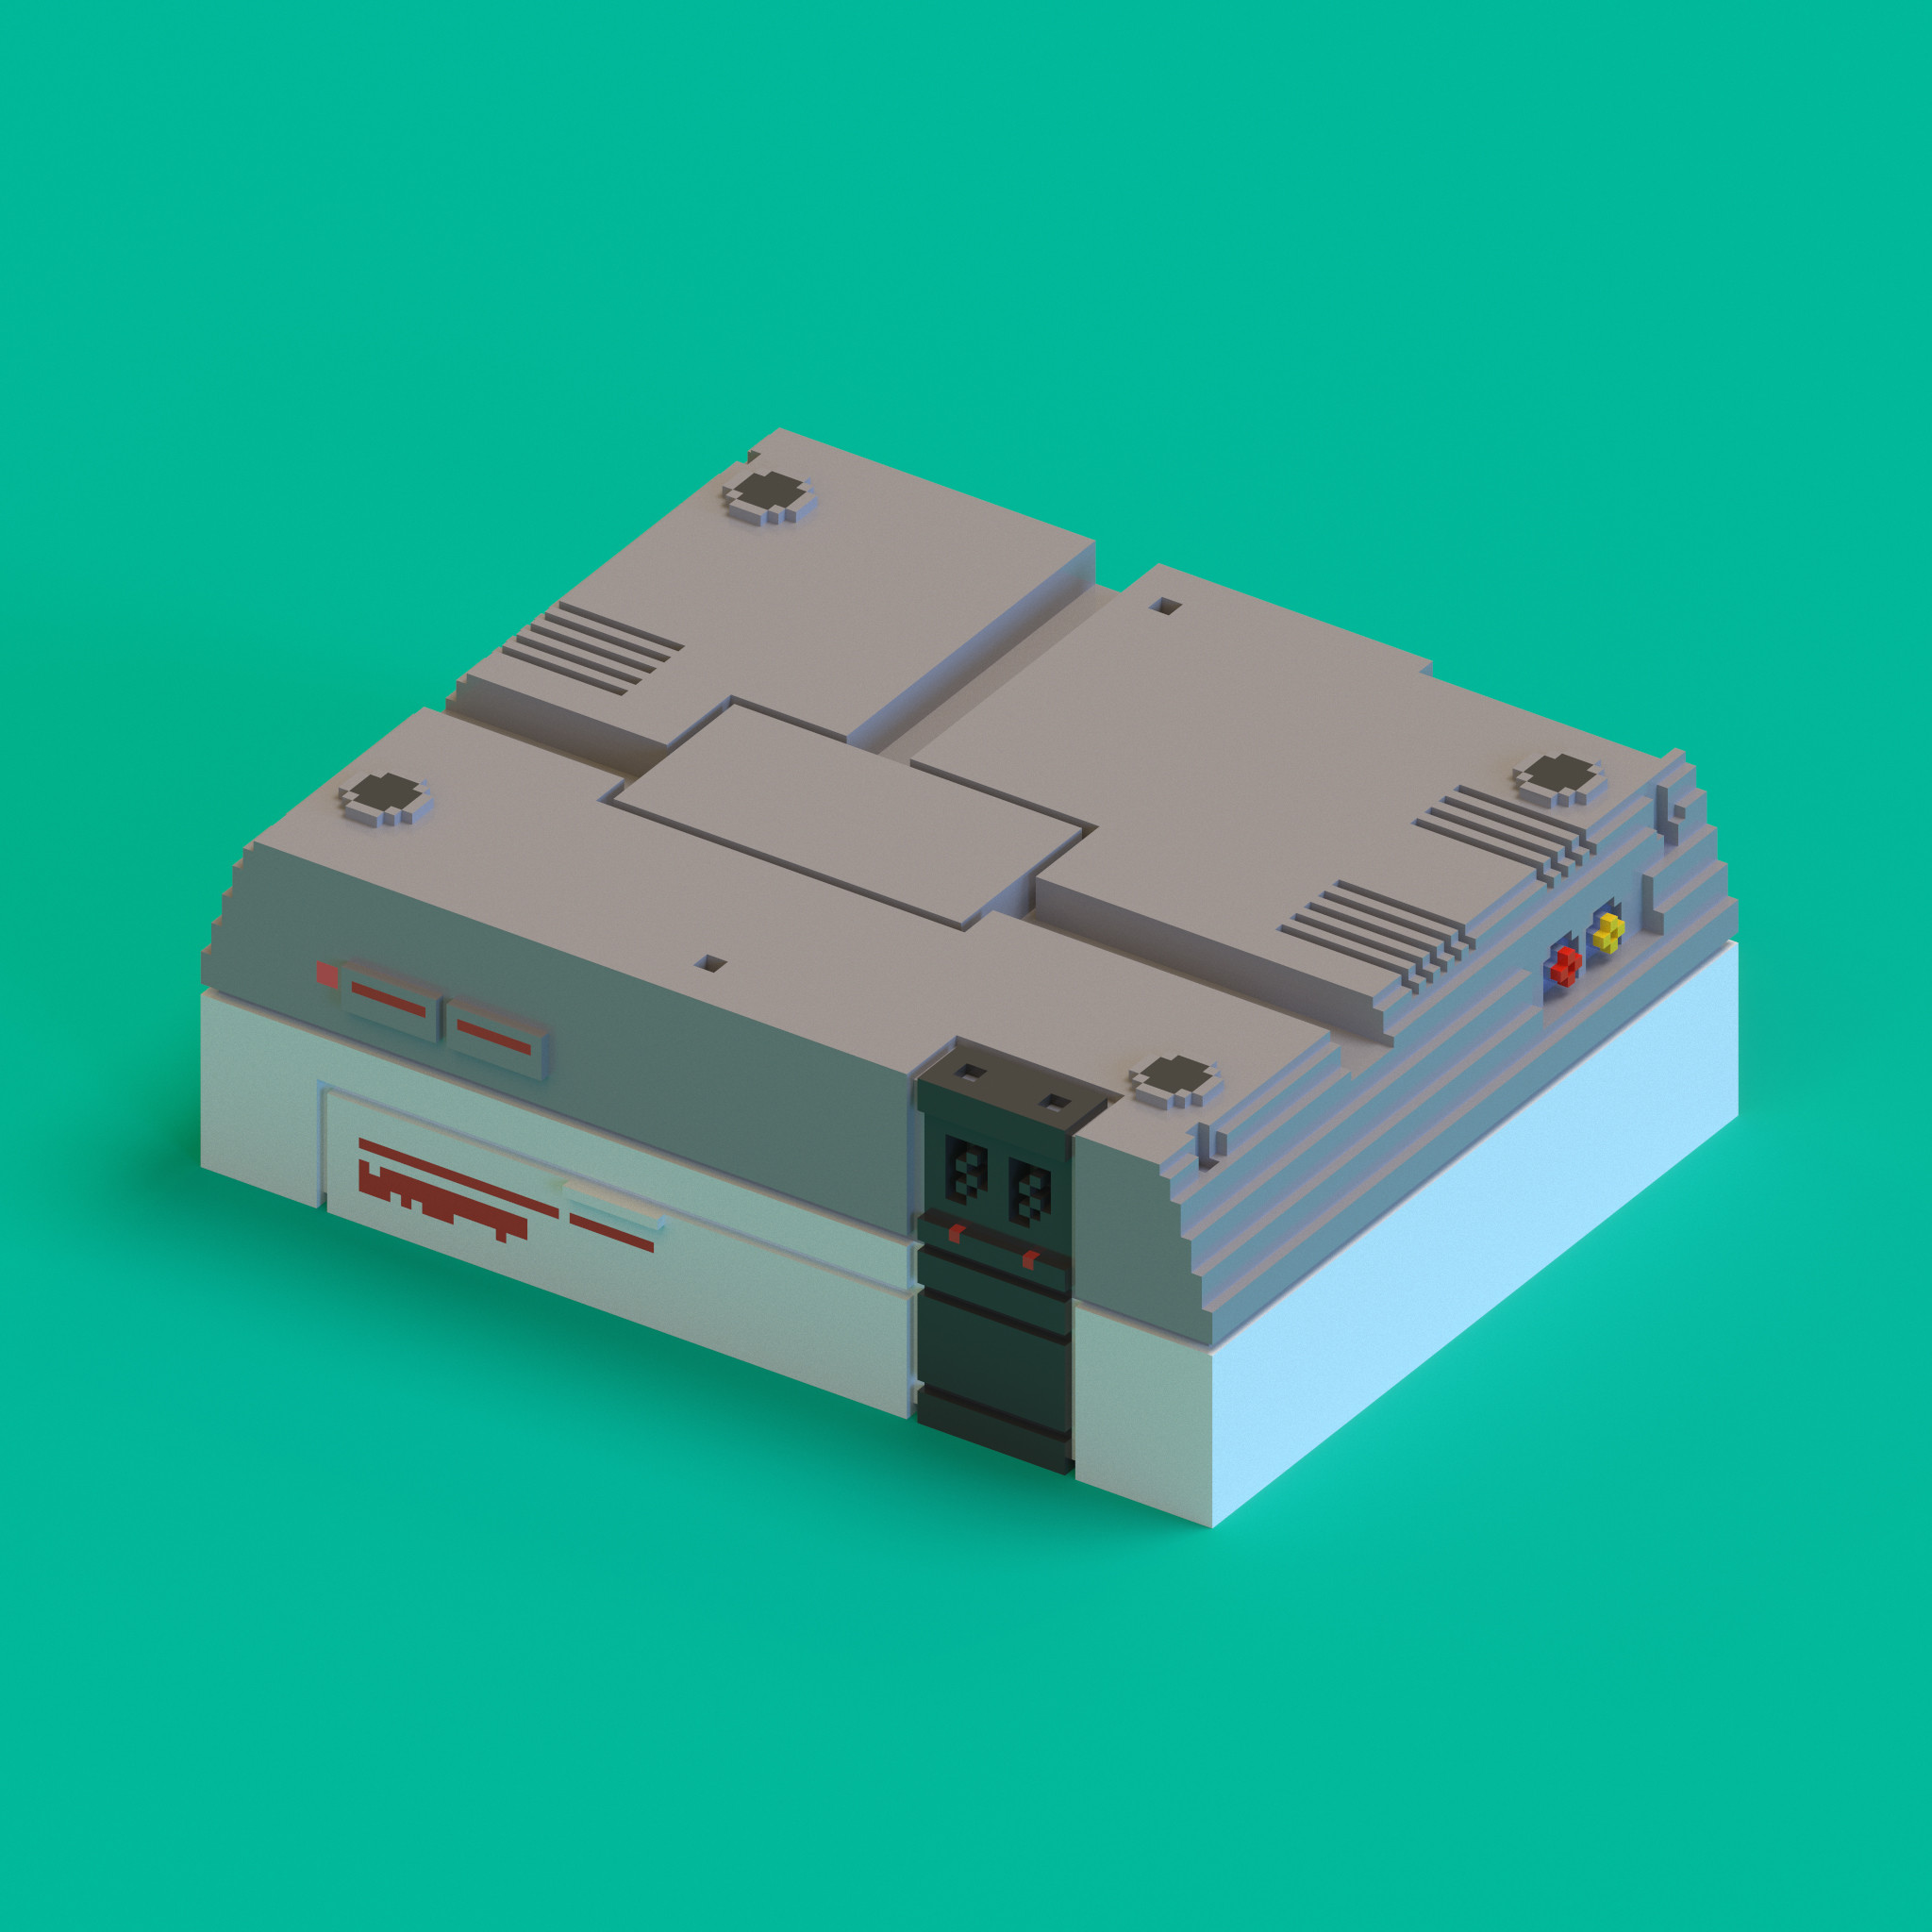 Undercarriage rendering of the voxel NES. Did you know the center block is removable and was designed as an expansion port that was ultimately never used commercially?